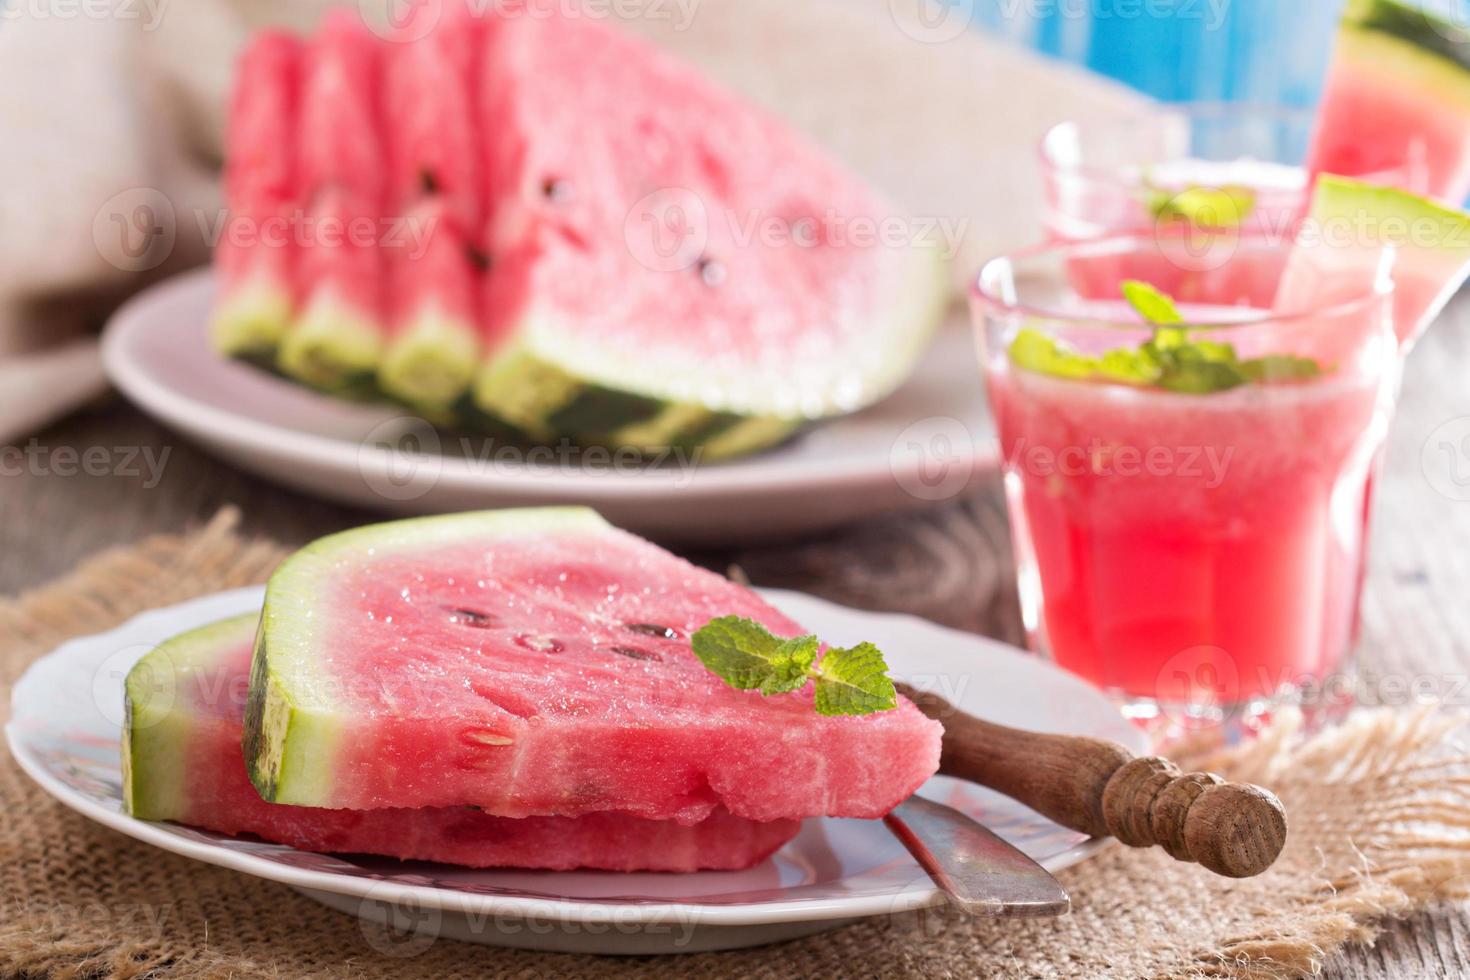 Watermelon slices on a plate photo